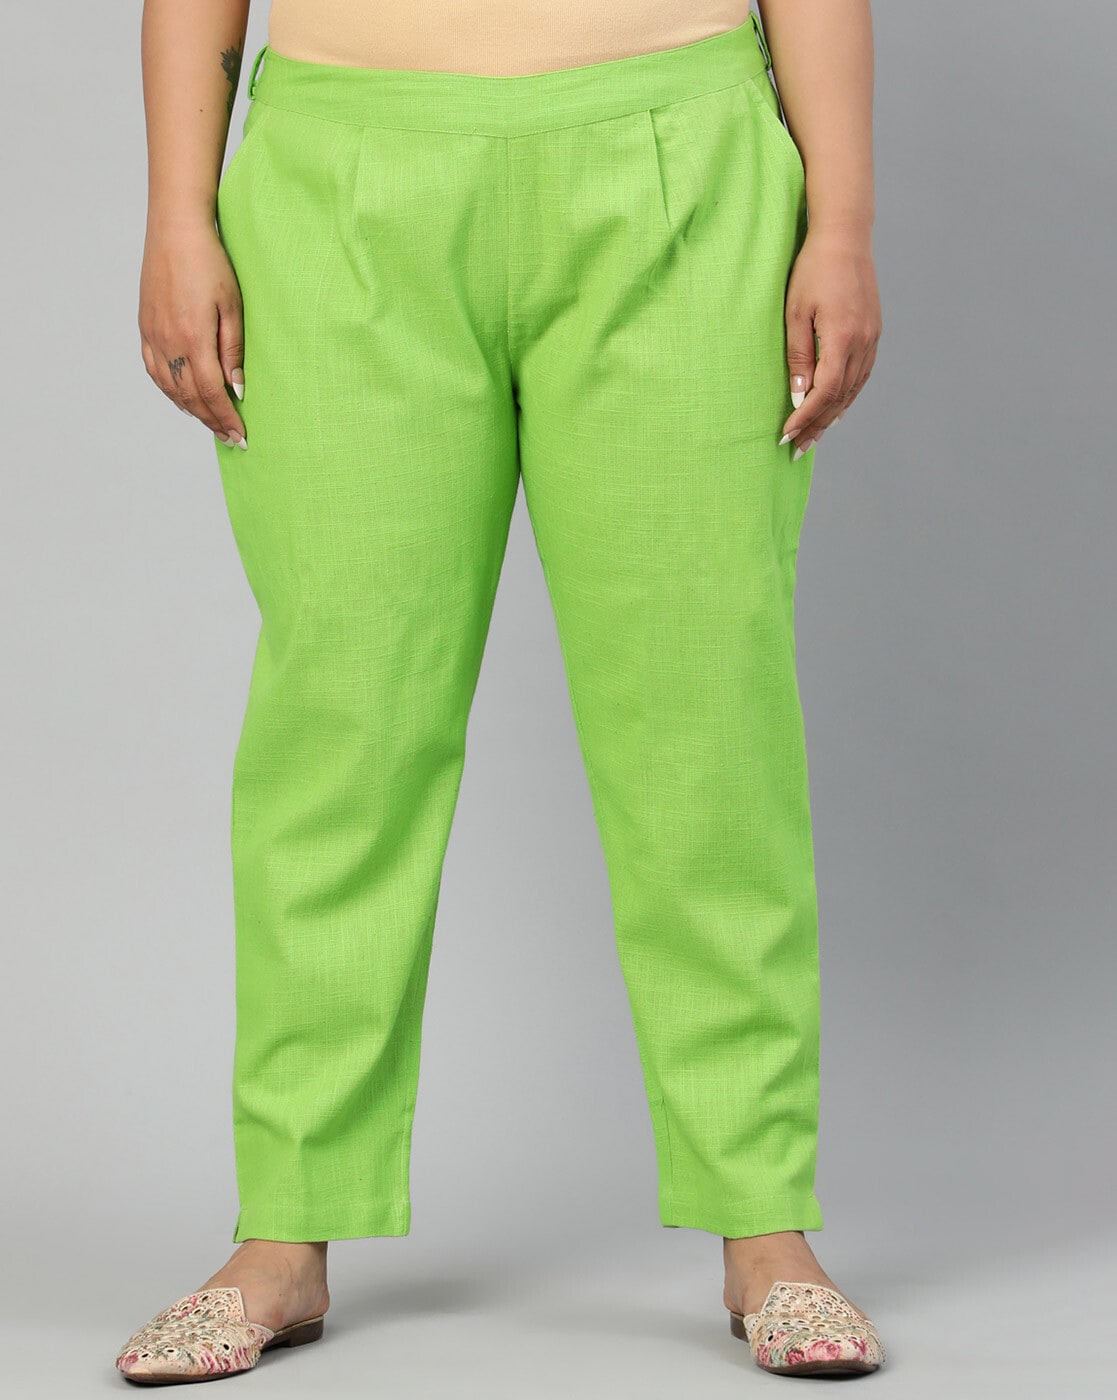 NWT $158 Anthropologie Farm Rio Embroidered Parrot Pants L | eBay